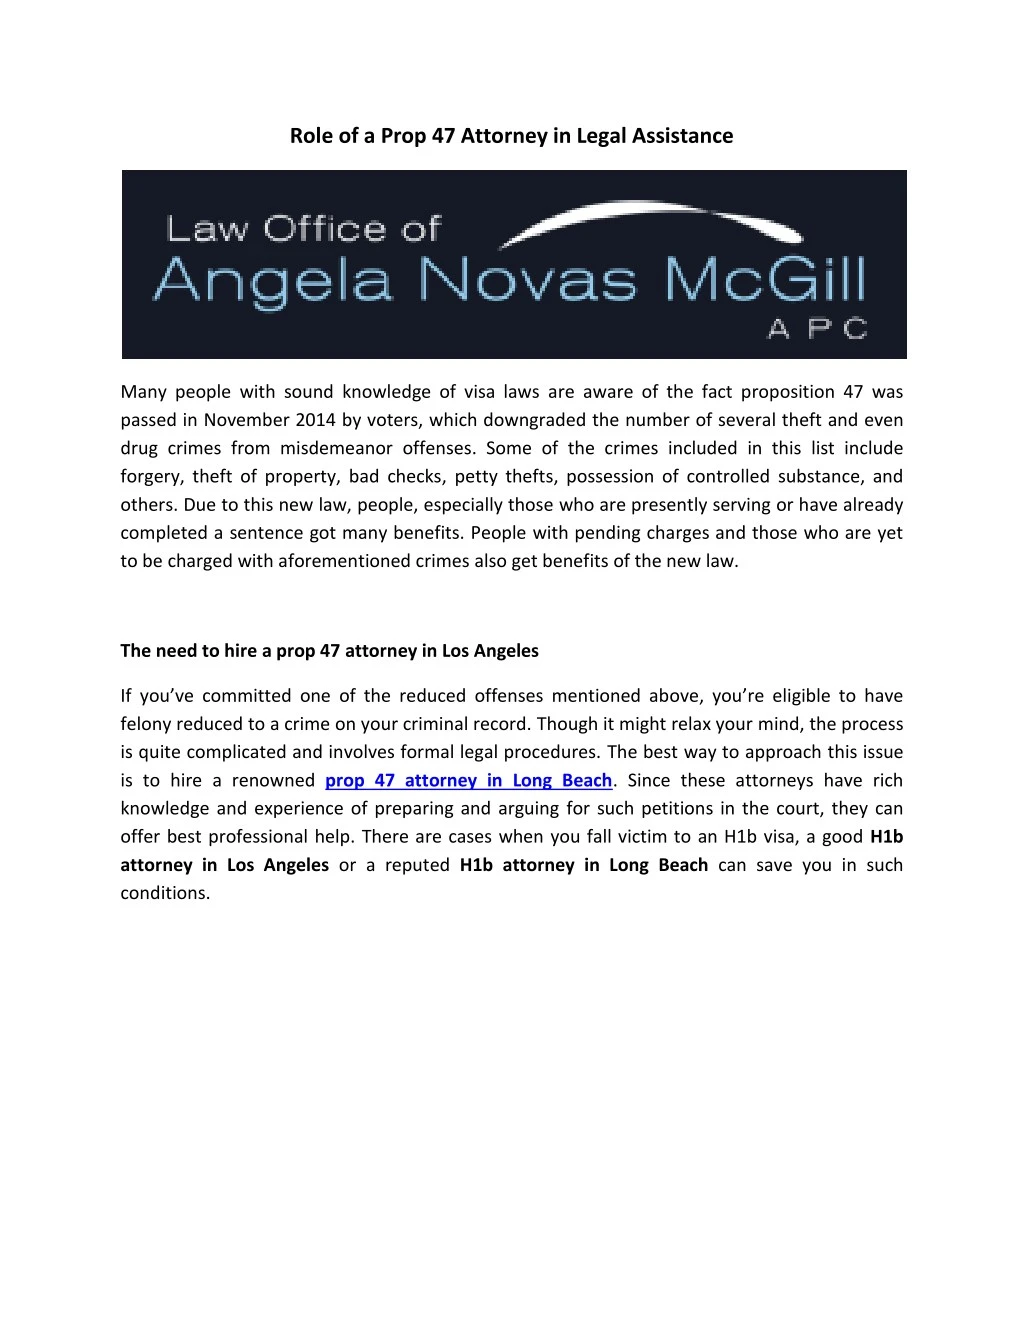 role of a prop 47 attorney in legal assistance